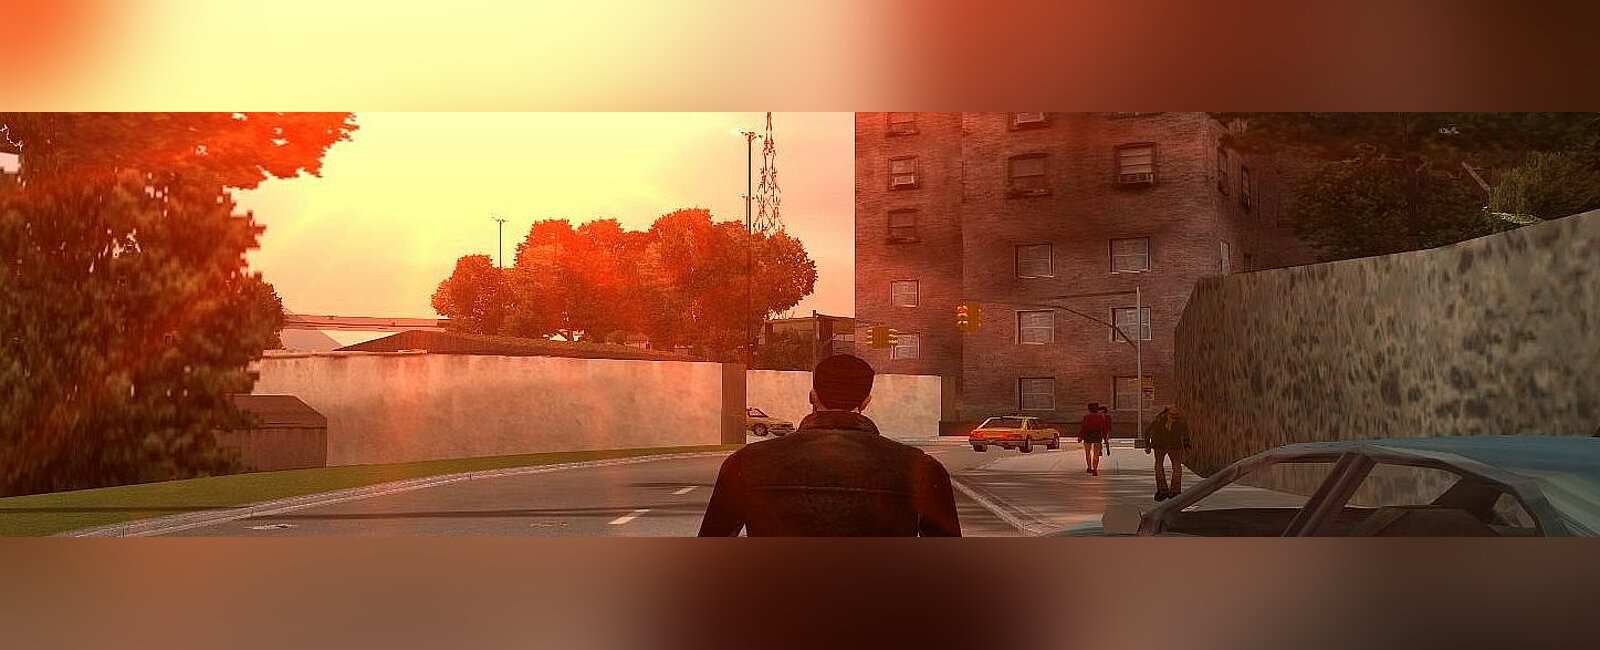 Rockstar Games discovered documents show why GTA 3 was meant to be a